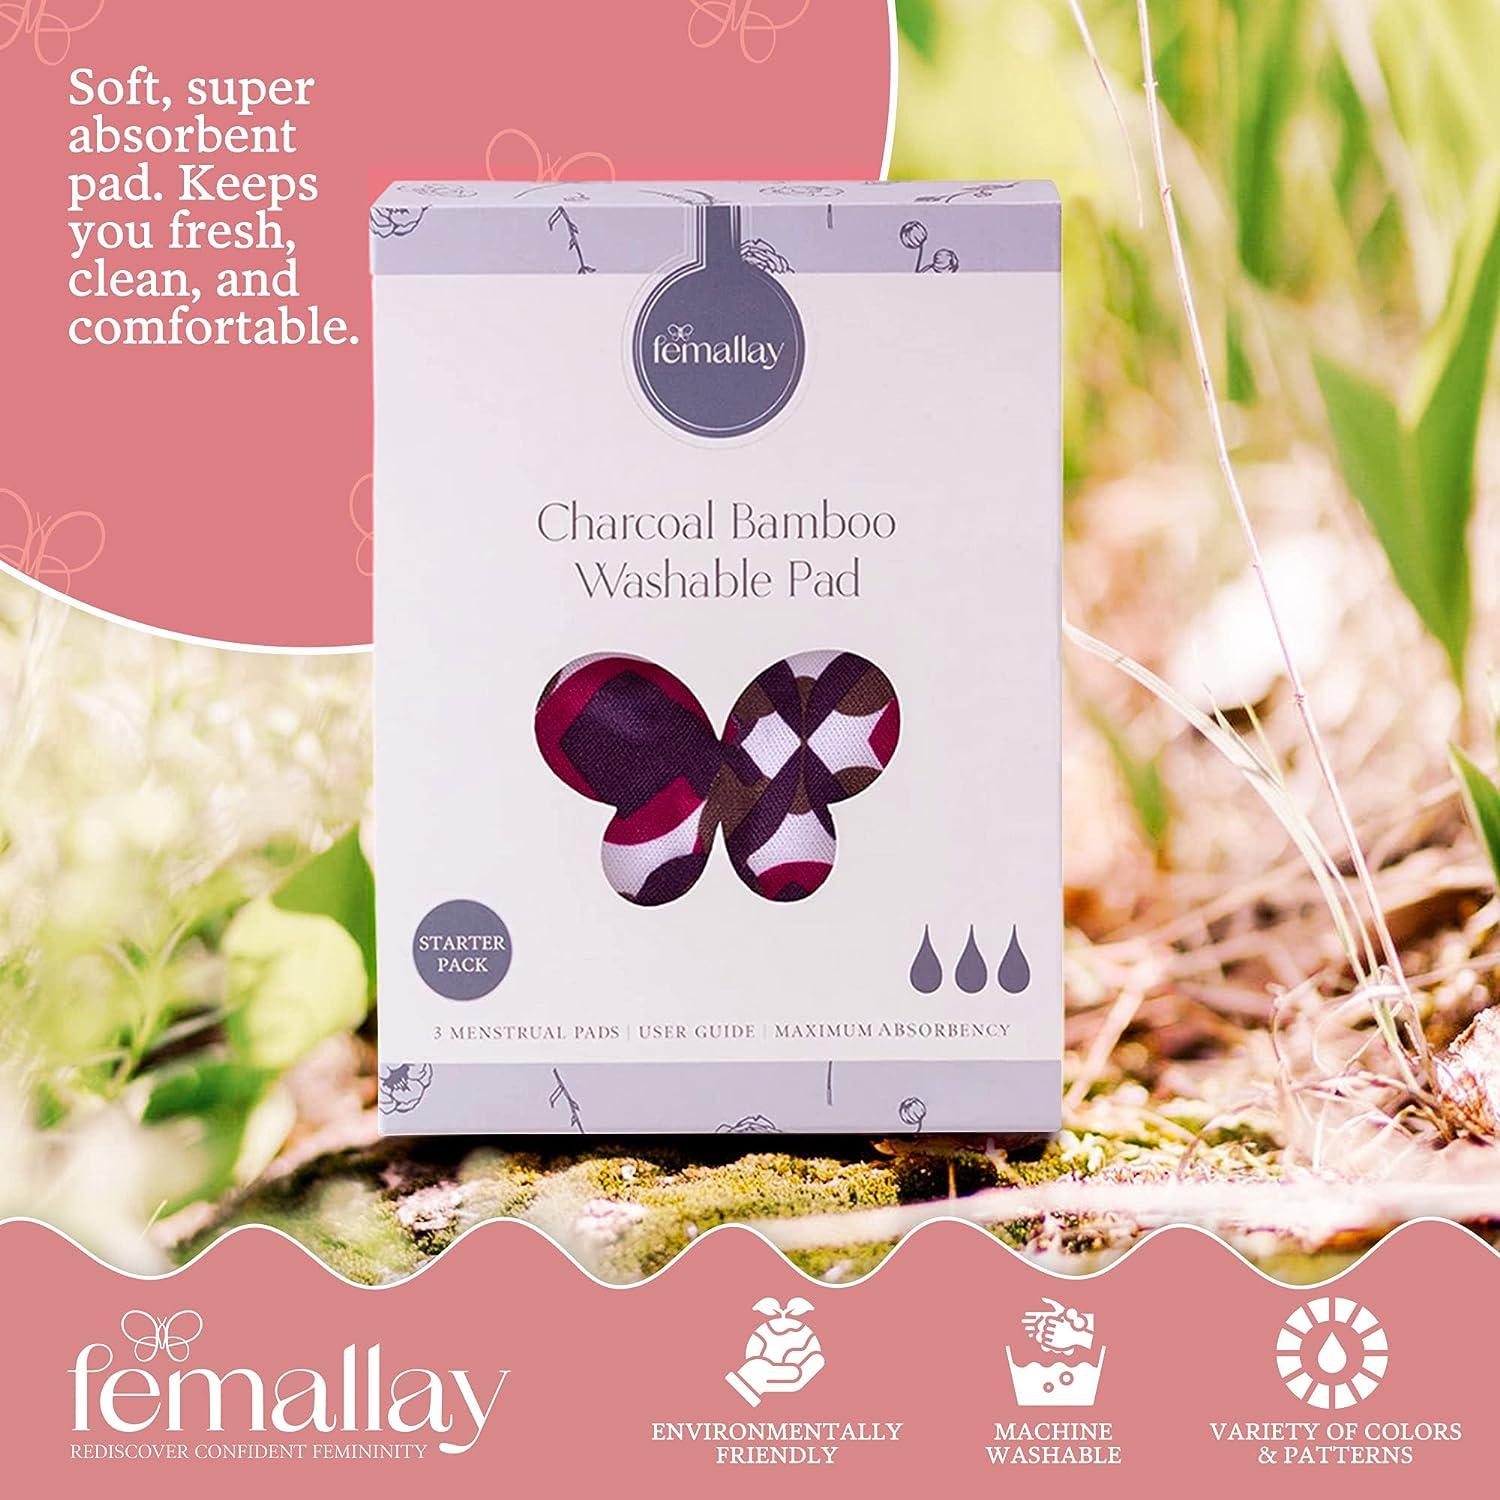 Femallay Reusable Cloth Menstrual Pads - Feminine Pads with Charcoal Bamboo  Layer Washable Sanitary Pads for Women Soft Absorbent Pads Feminine Hygiene  Products Sampler Kit Earthy Minky